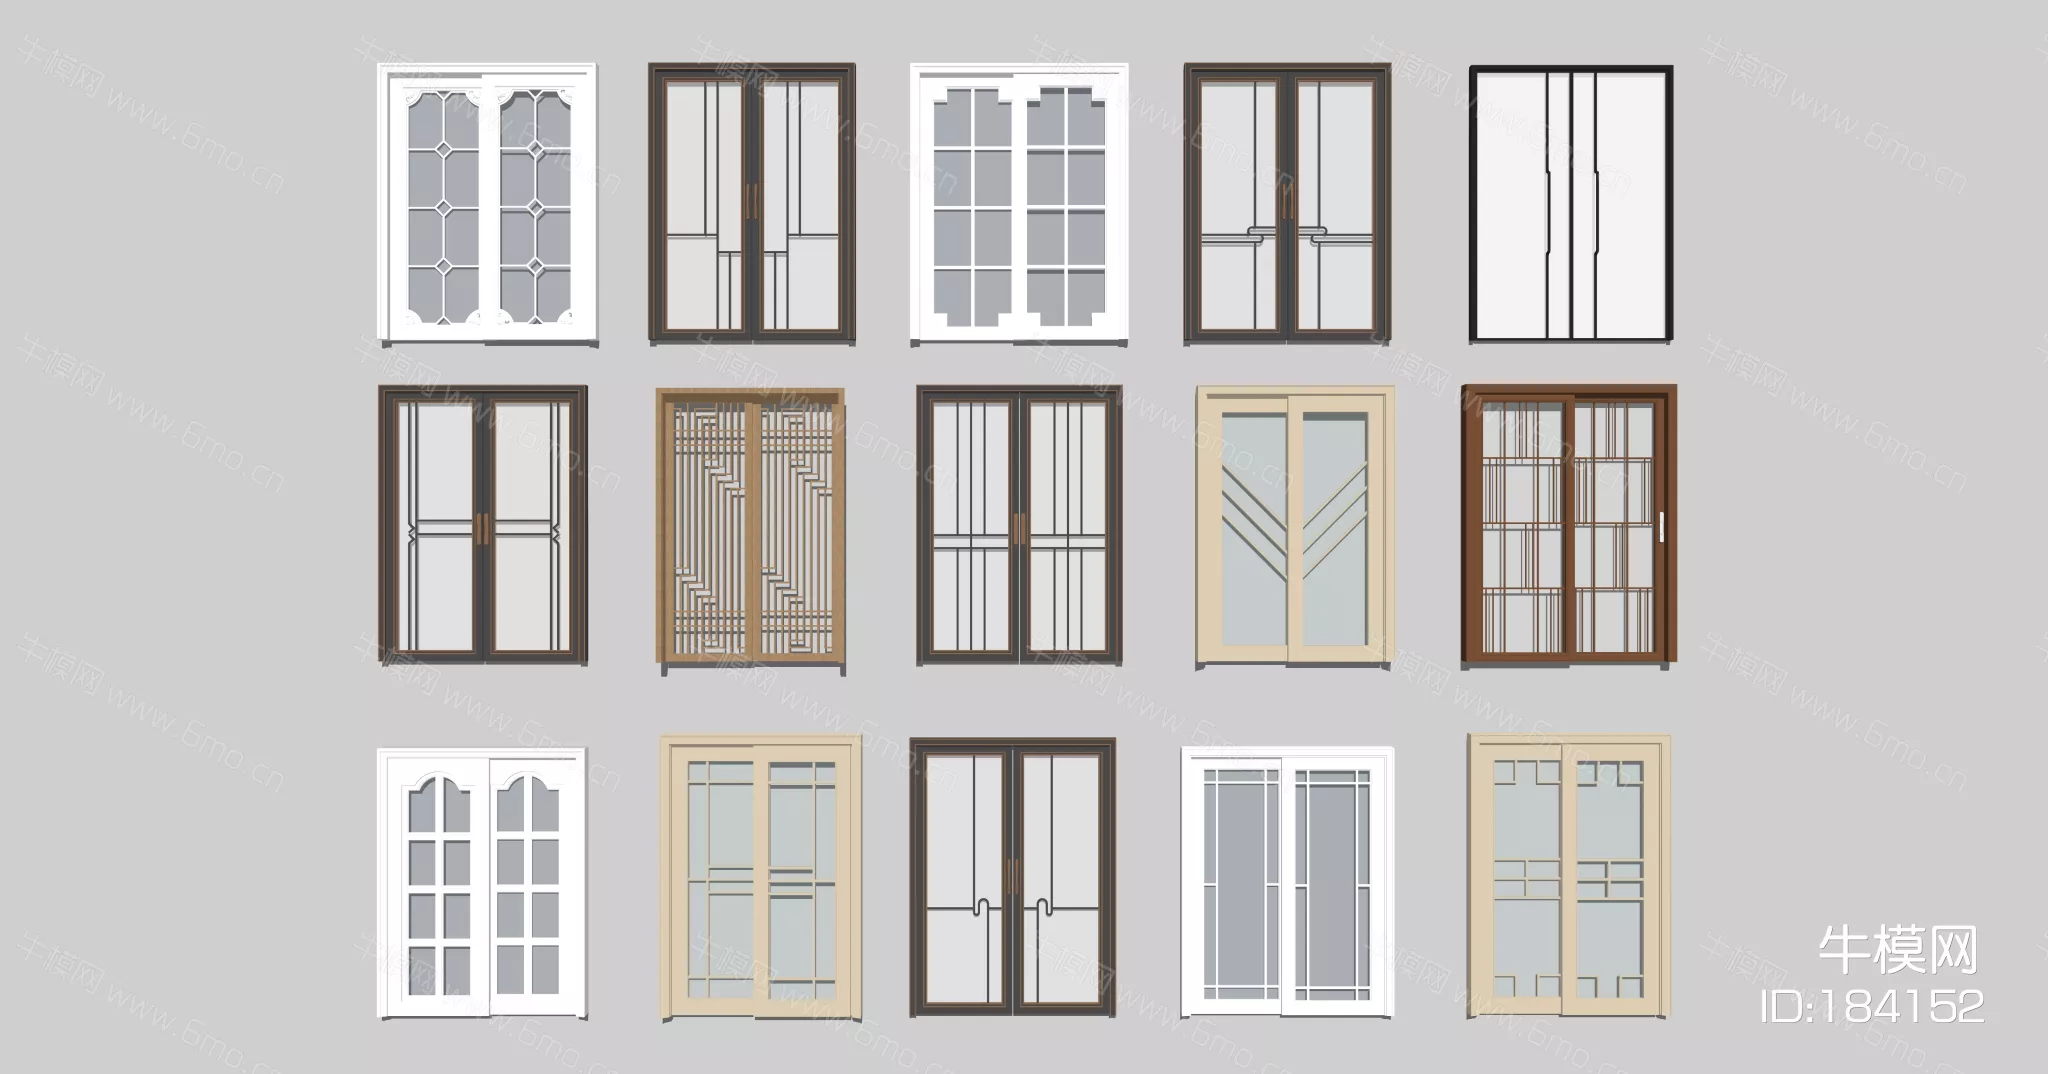 CHINESE DOOR AND WINDOWS - SKETCHUP 3D MODEL - ENSCAPE - 184152